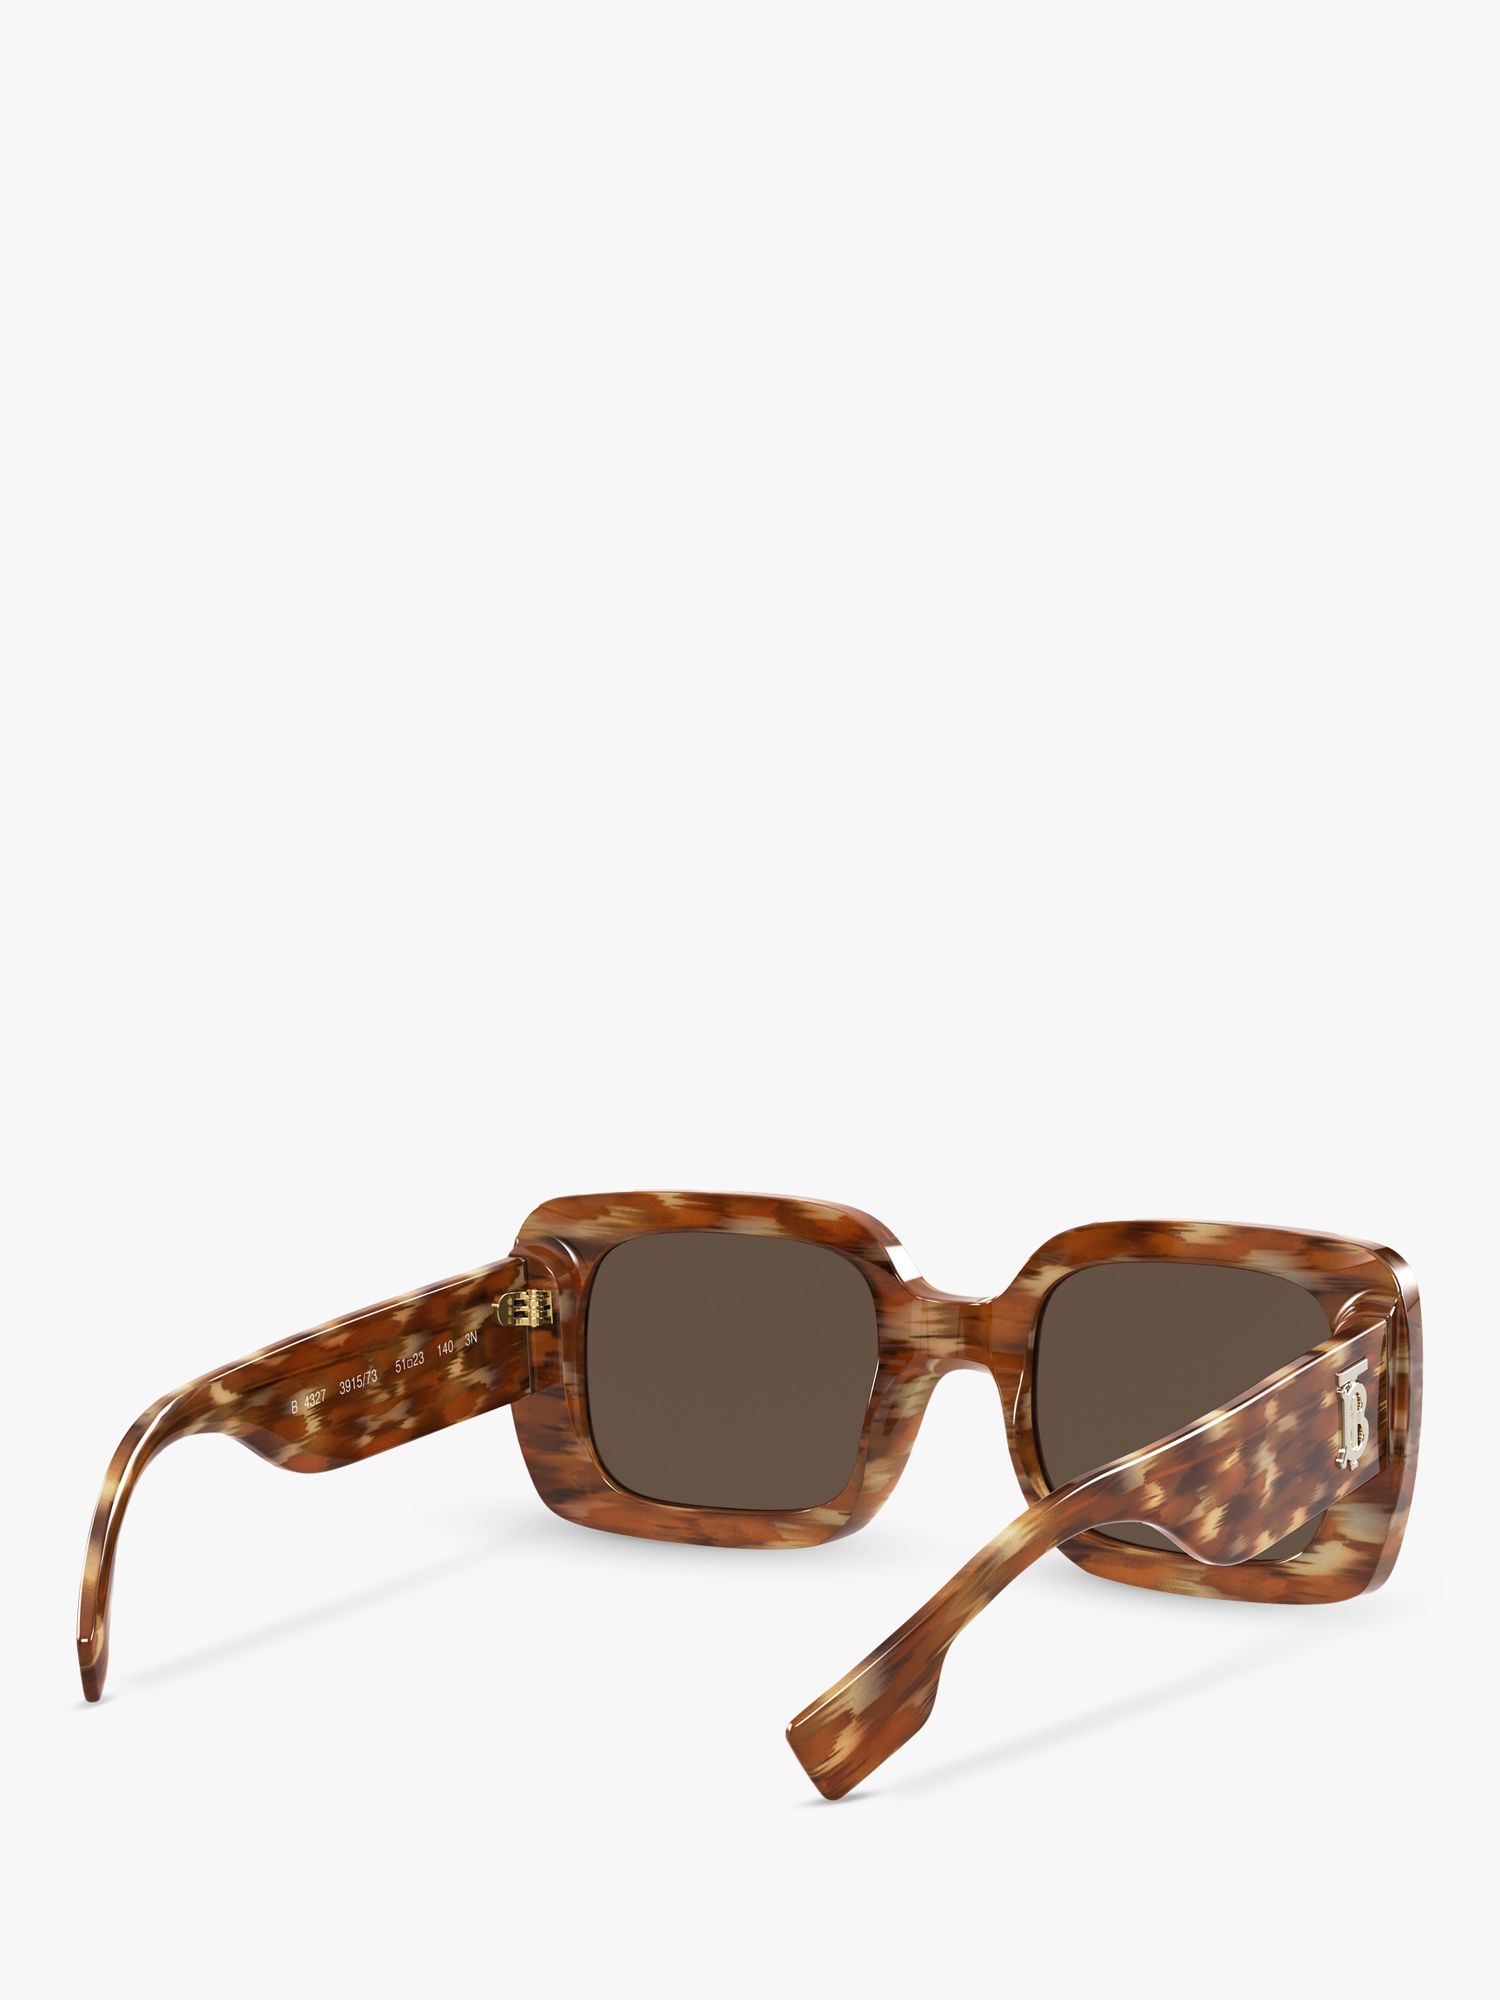 Burberry BE4327 Women's Square Sunglasses, Brown at John Lewis & Partners